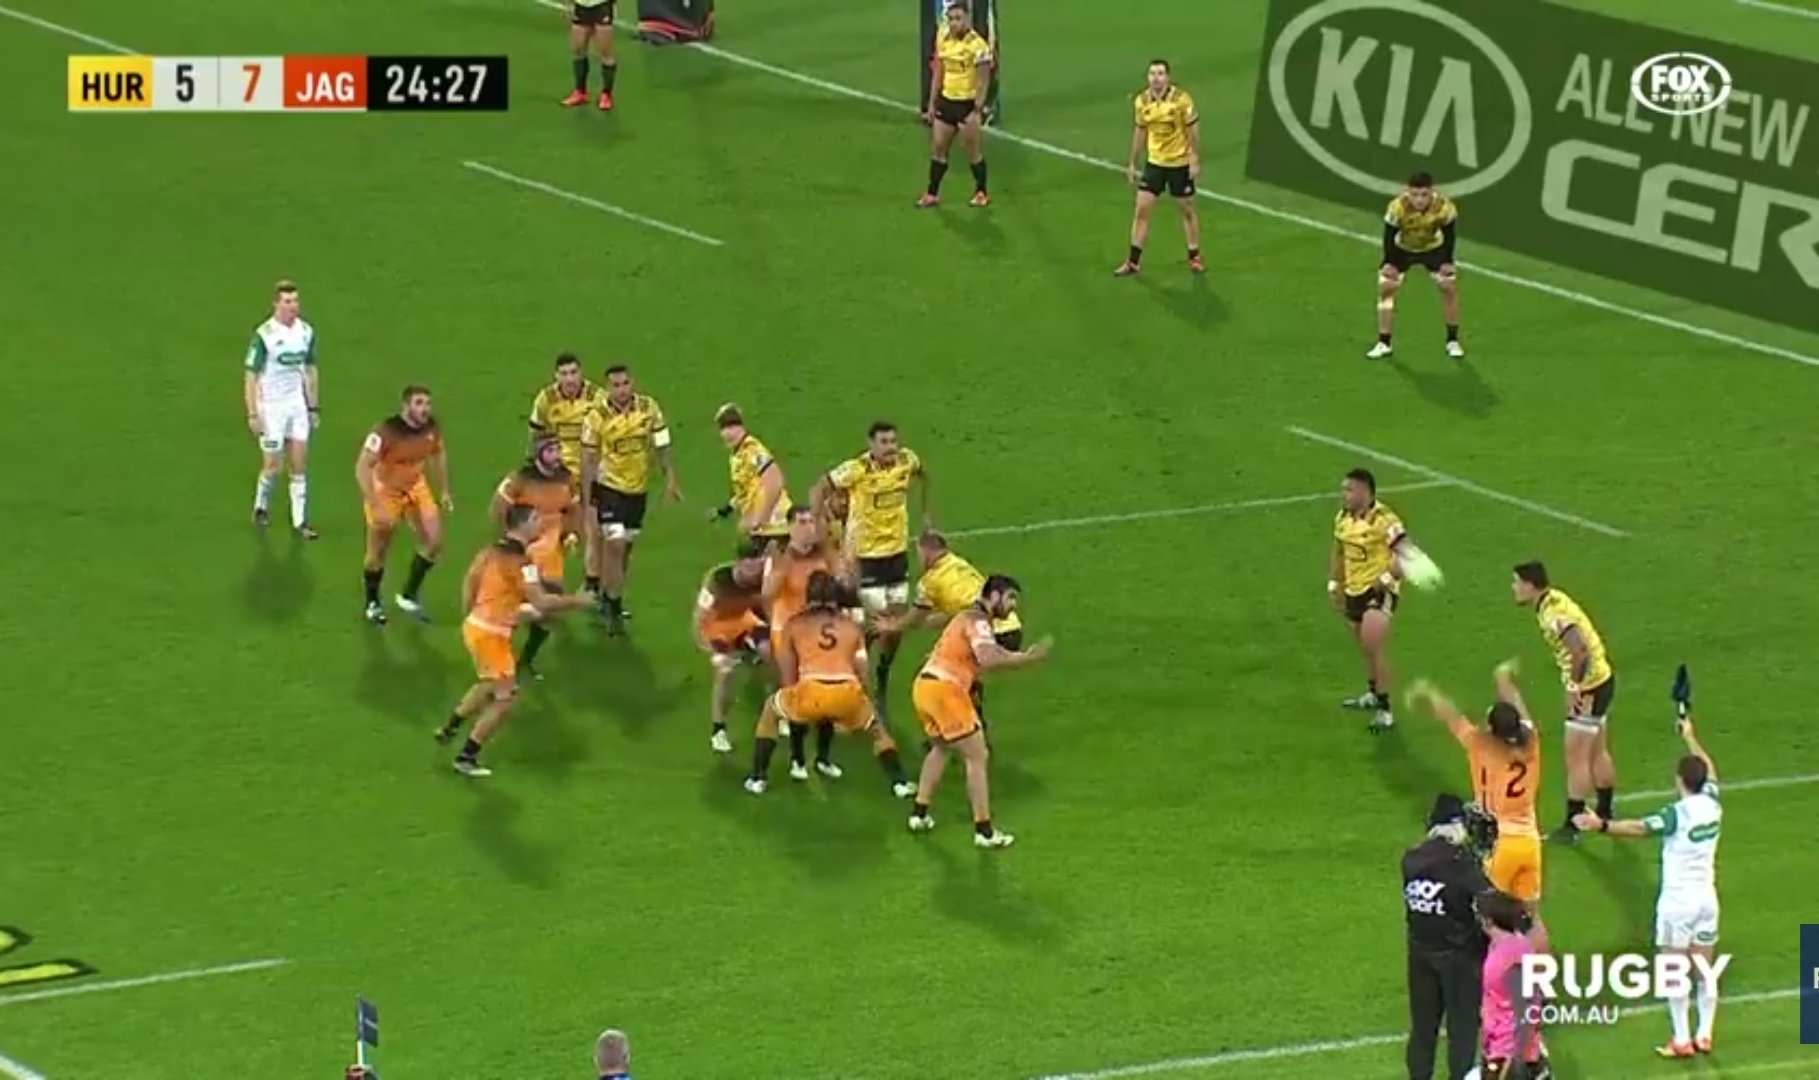 Jaguares use European style rugby to annihilate NZ's best Super Rugby side